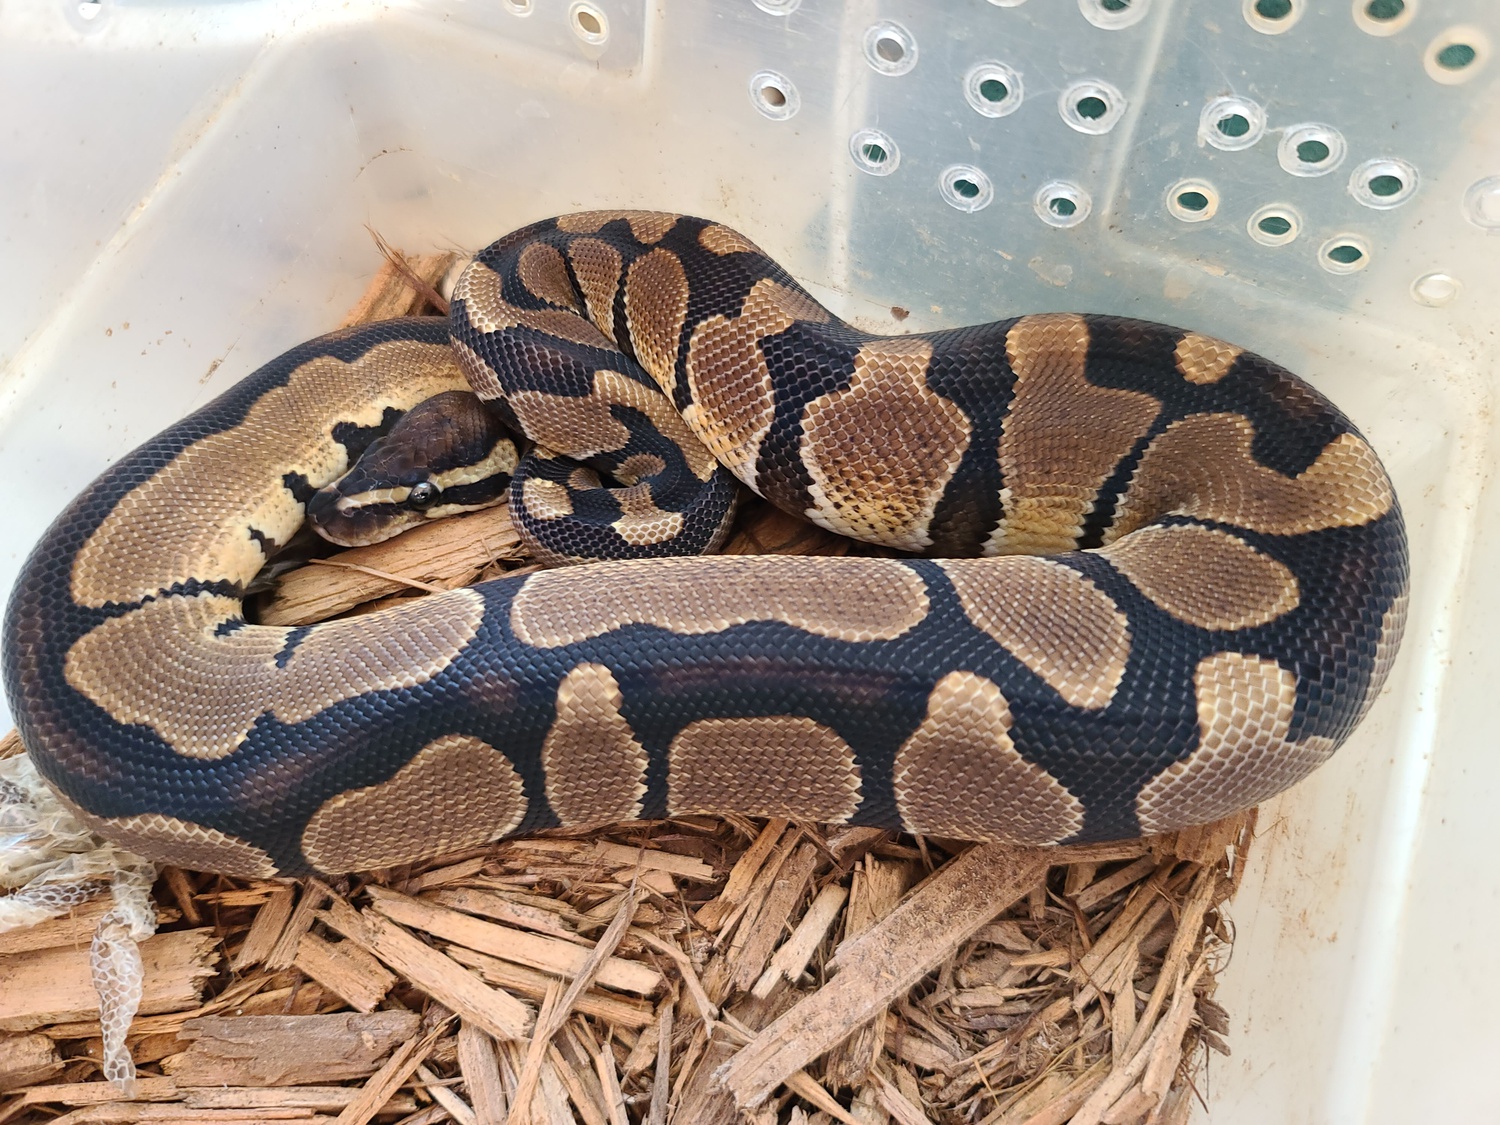 Super Jolliff Tiger Possible Double Het Snow Ball Python by Extraordinary Ectotherms